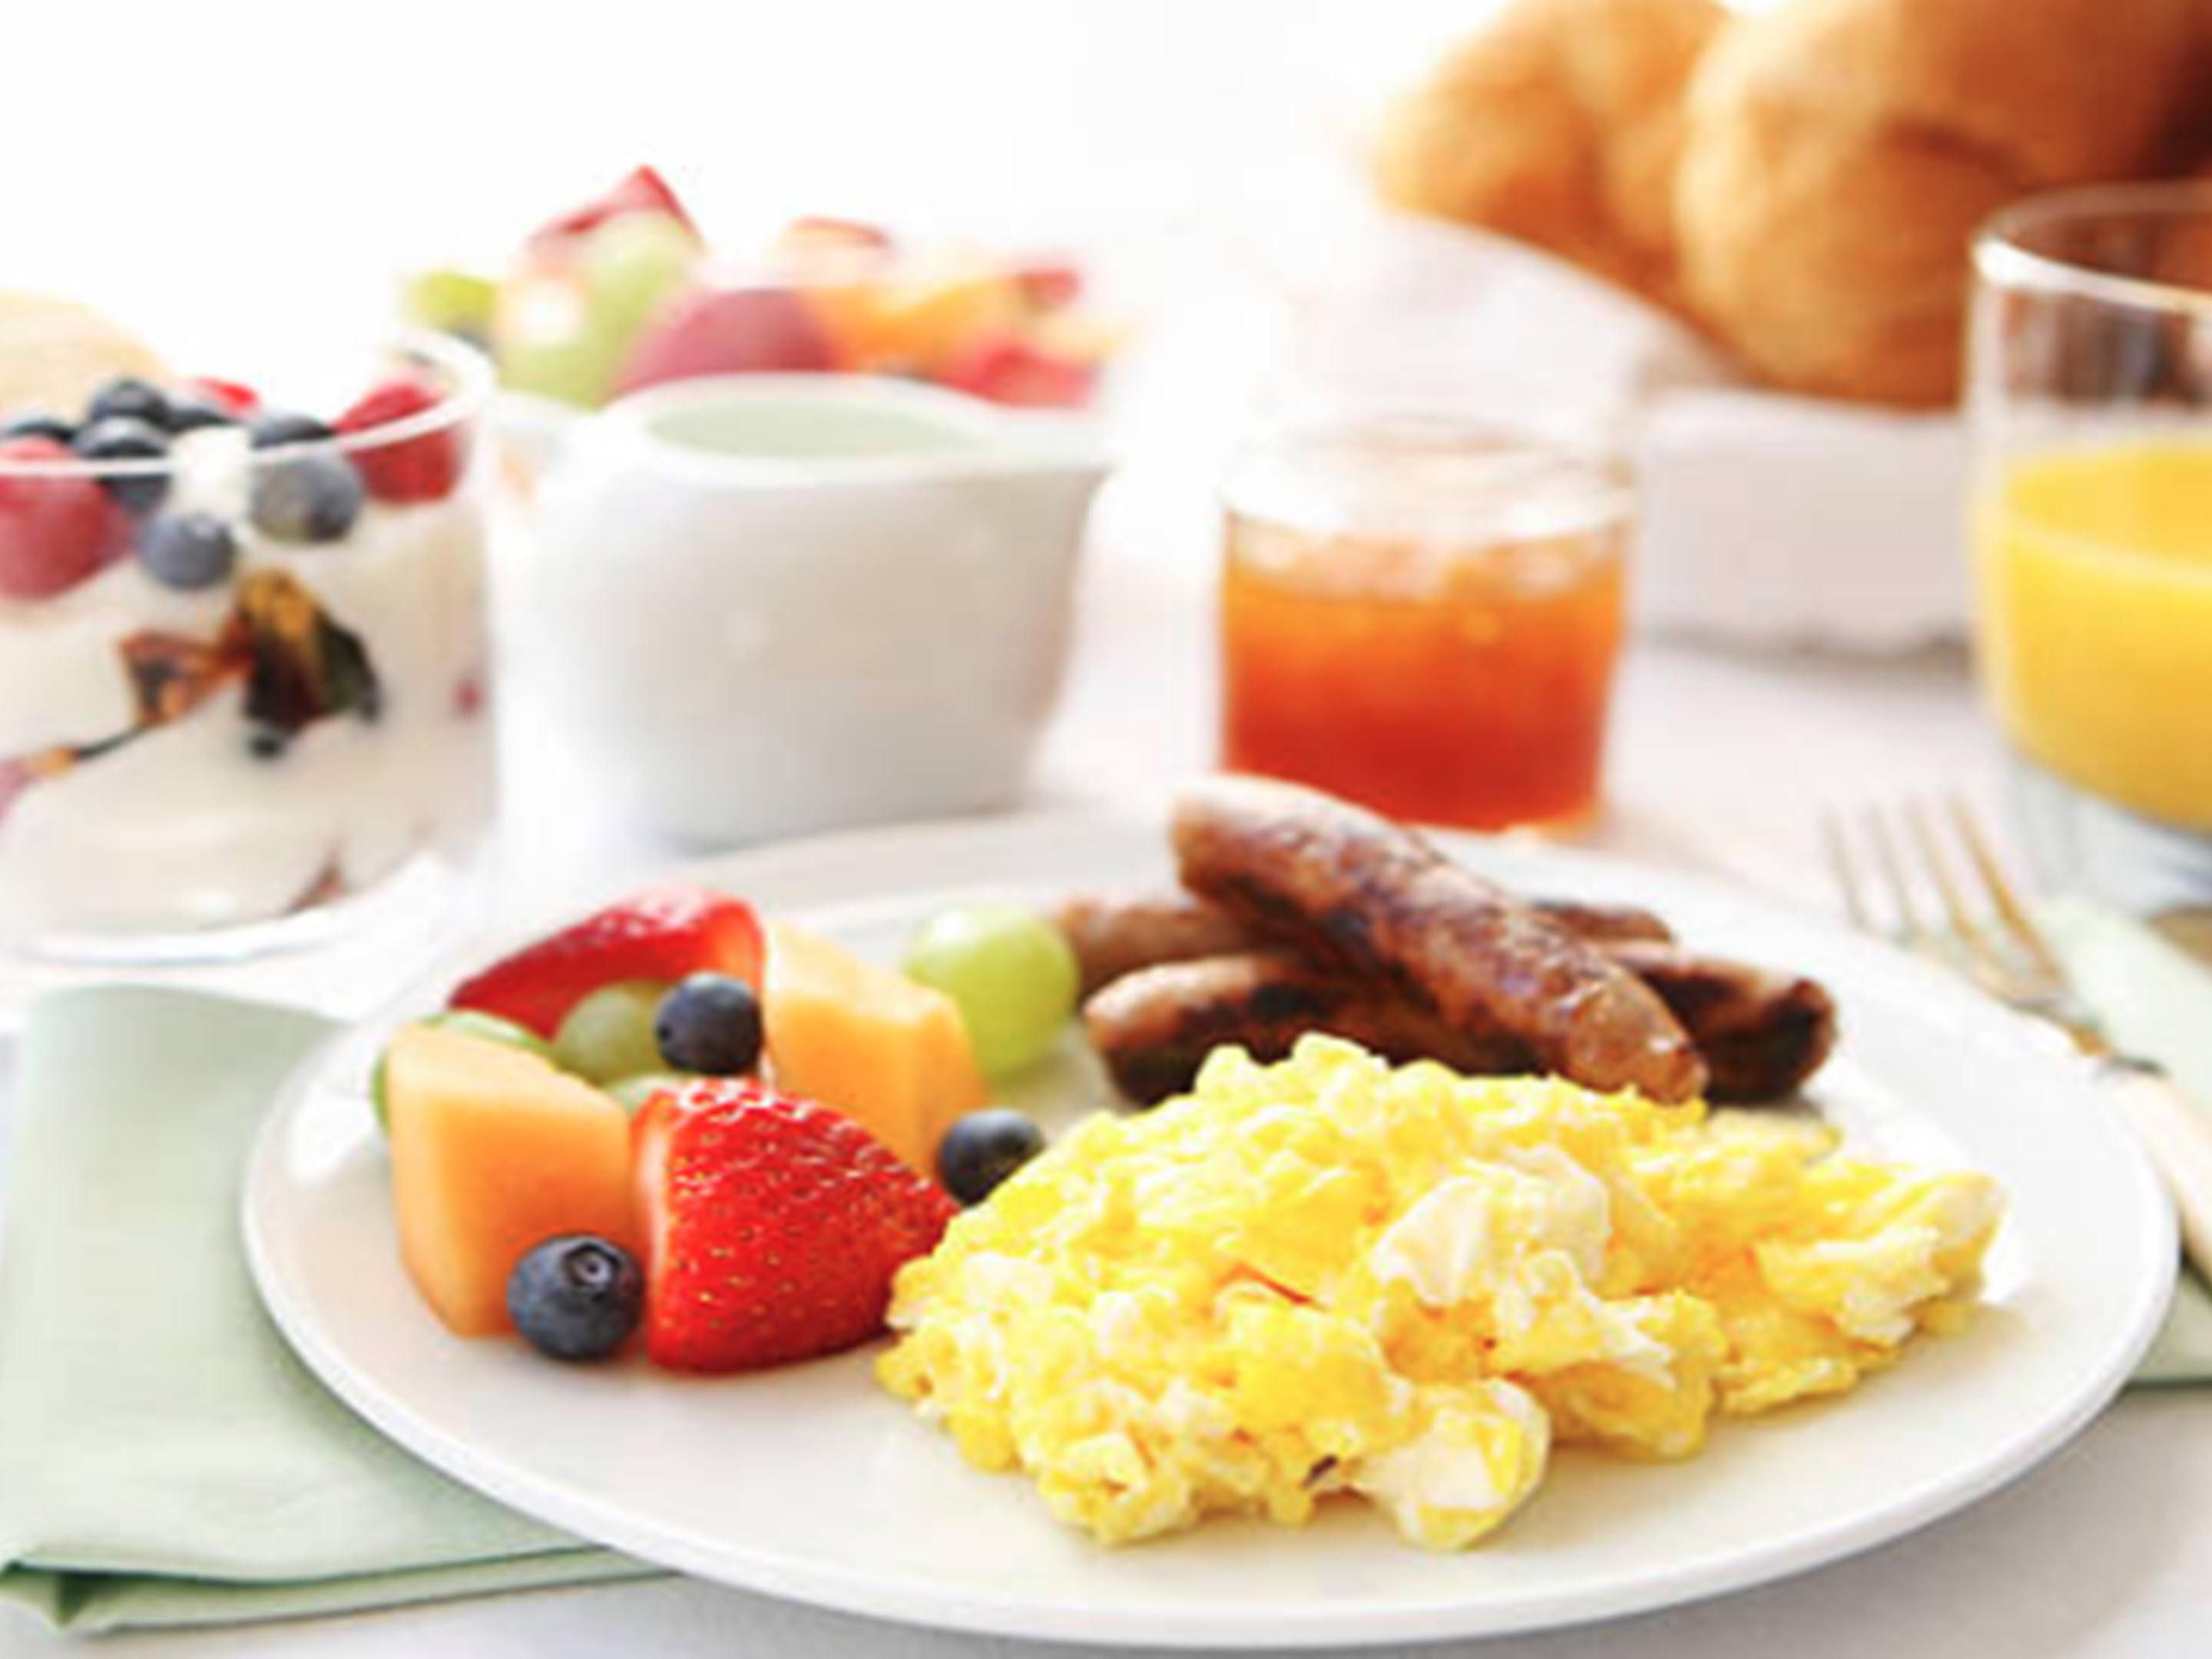 Enhance your stay with breakfast!